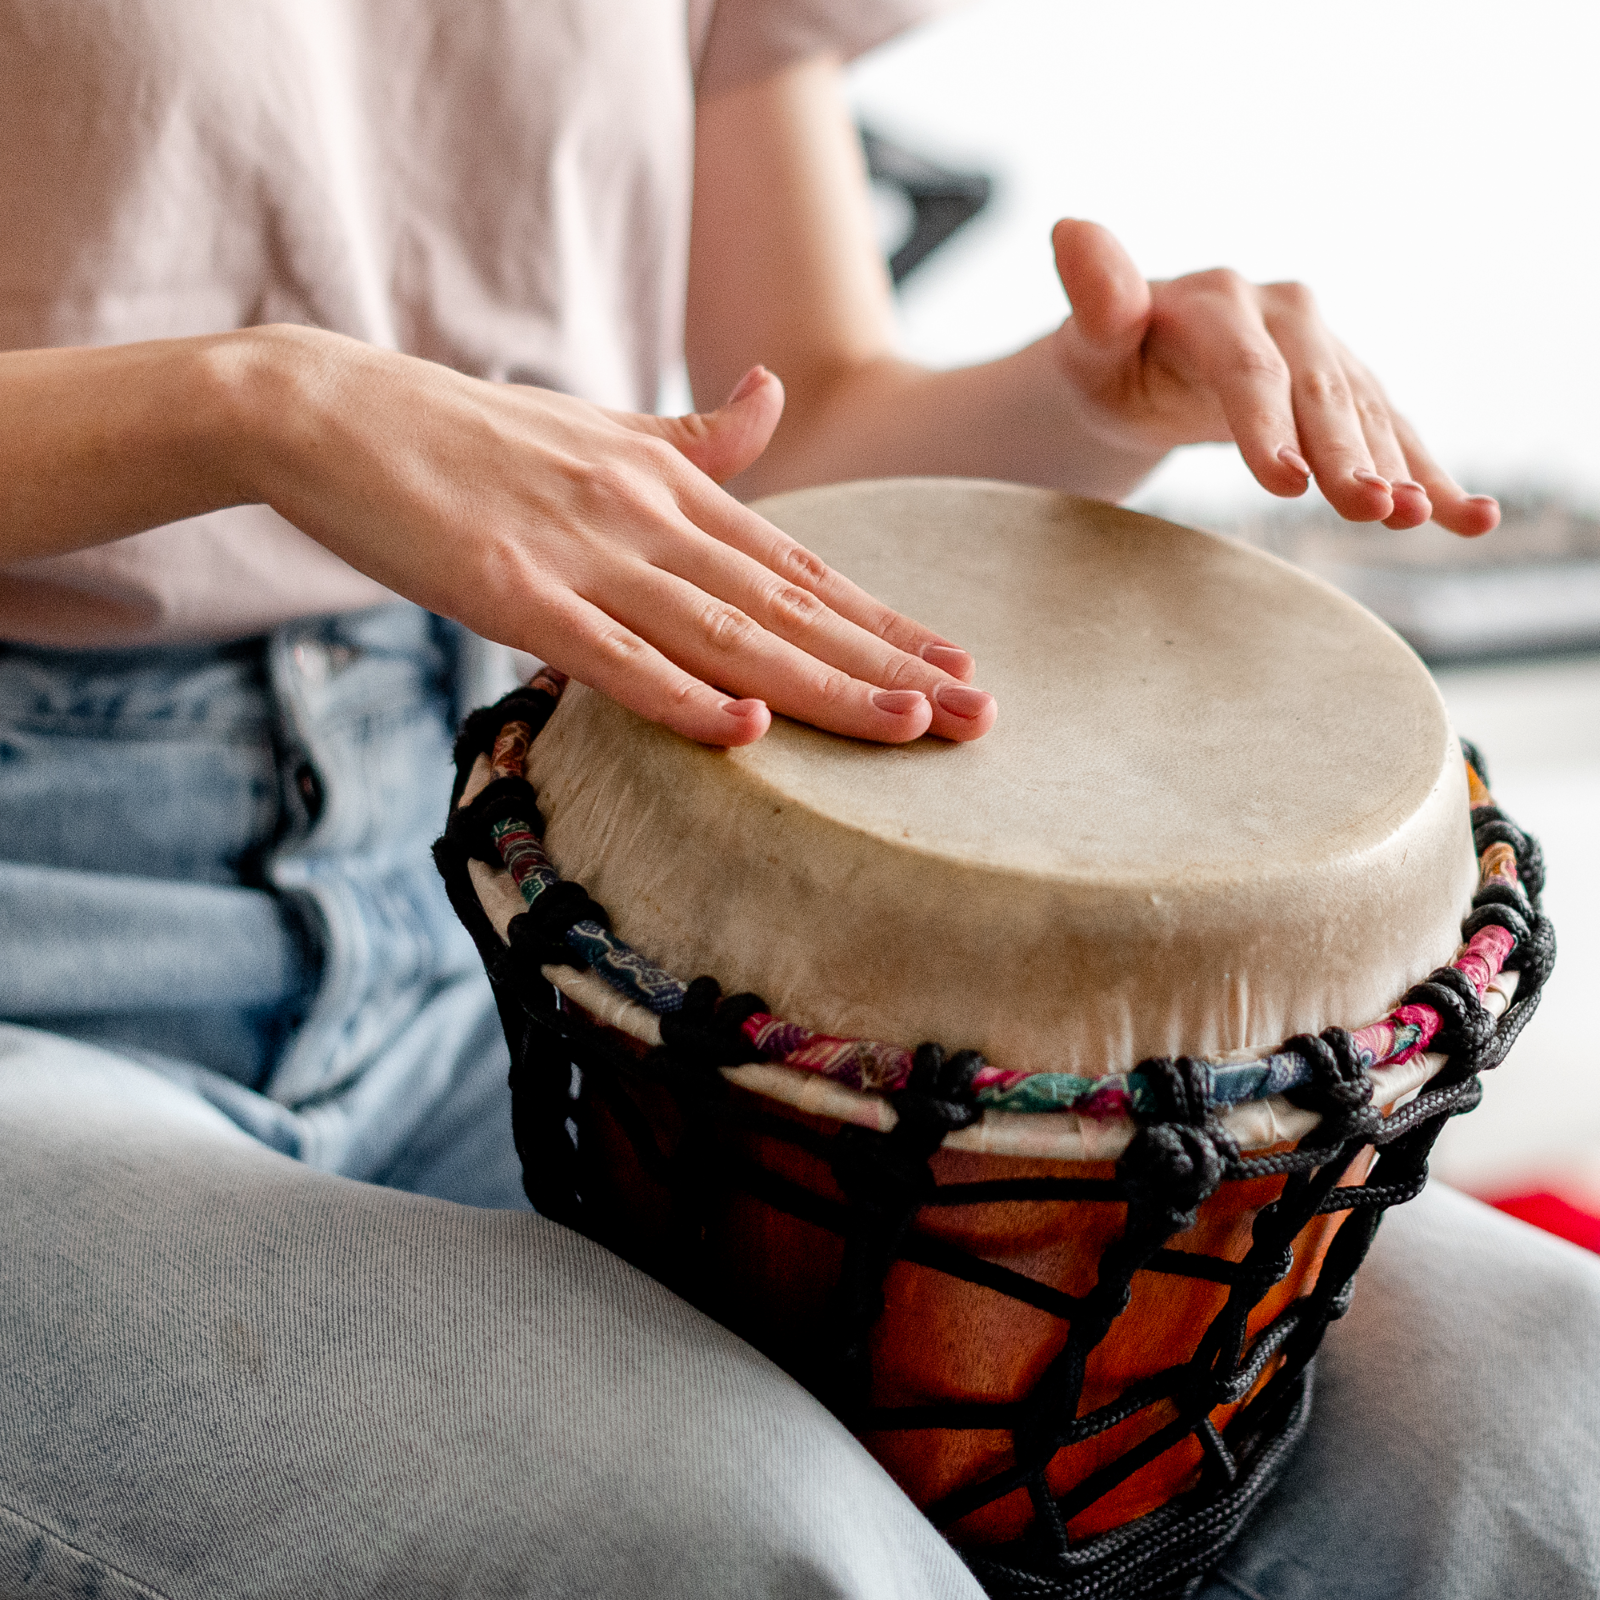 Adult djembe lesson 40 minutes : photo 1